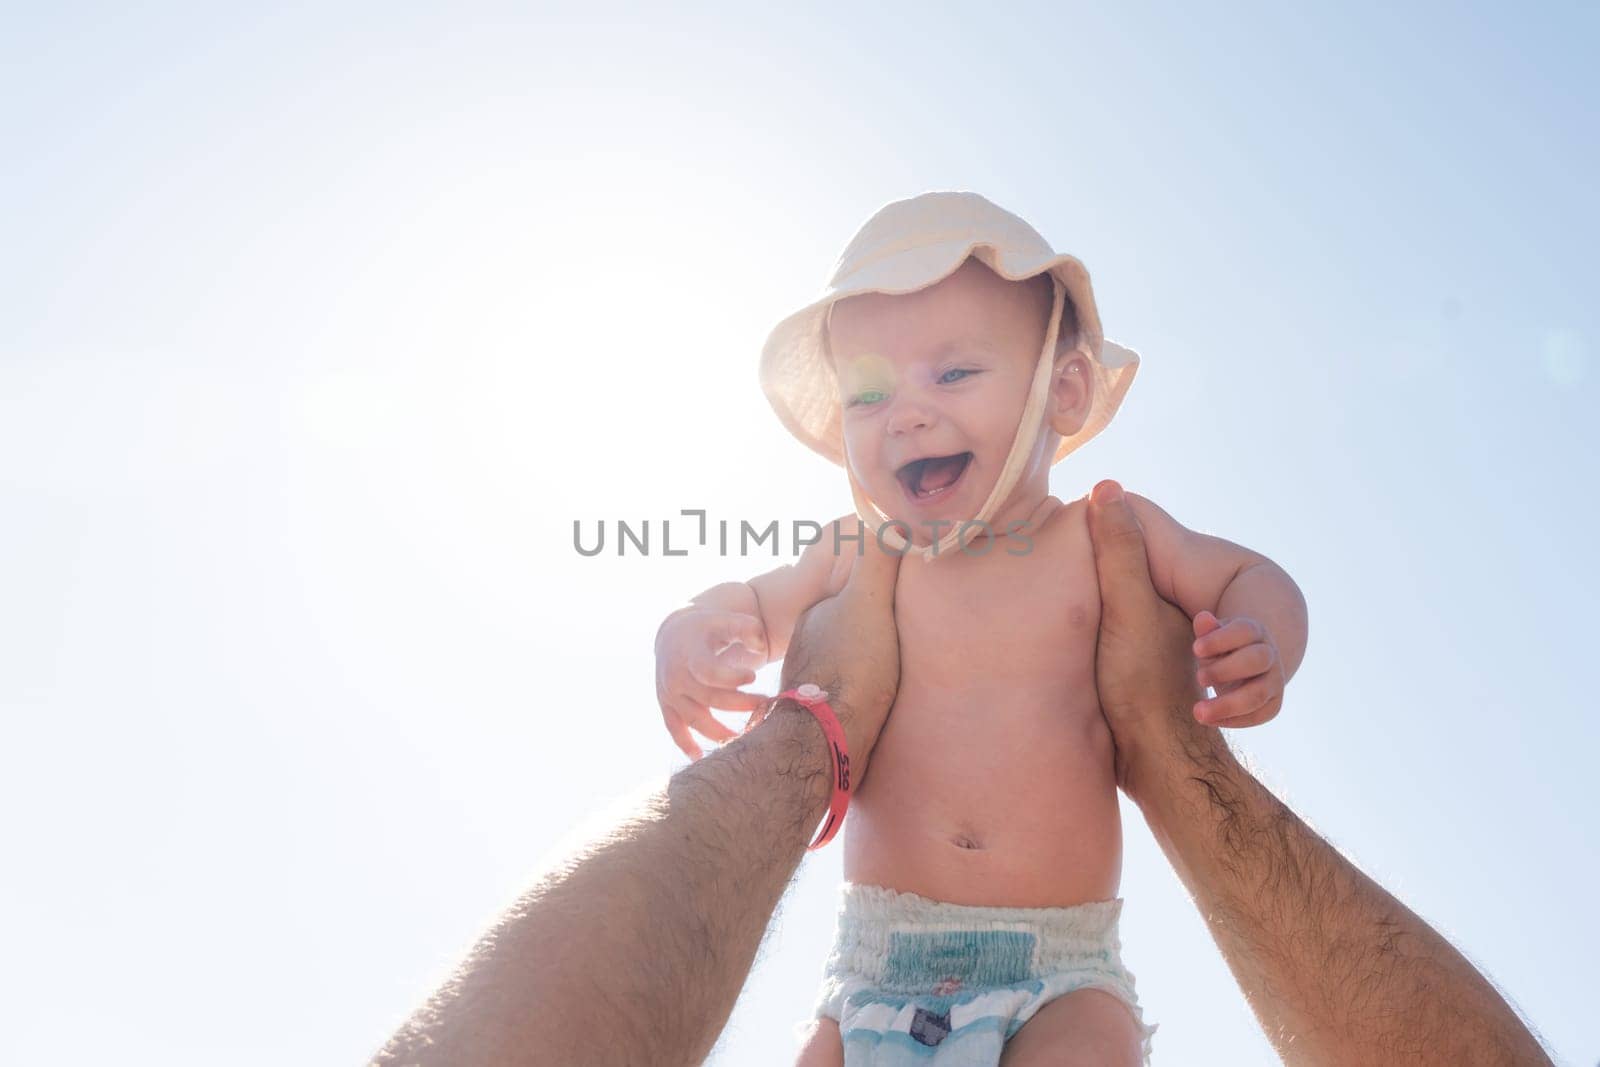 Capturing a tender moment as a father holds his baby high in the air, the sunlight creating a warm backdrop. Concept of childhood joy and fatherly bond